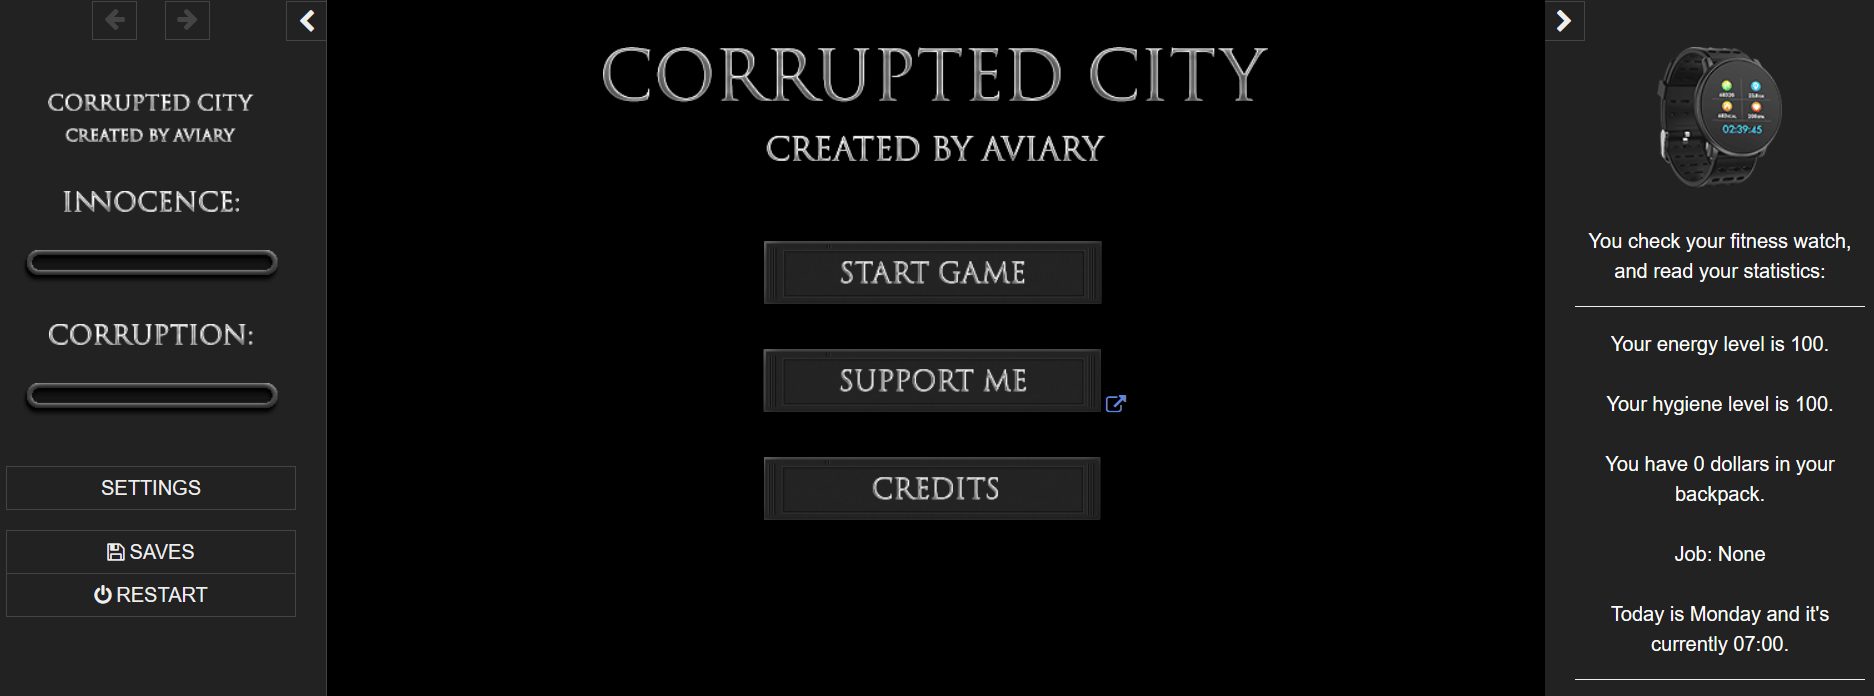 any corrupted city government